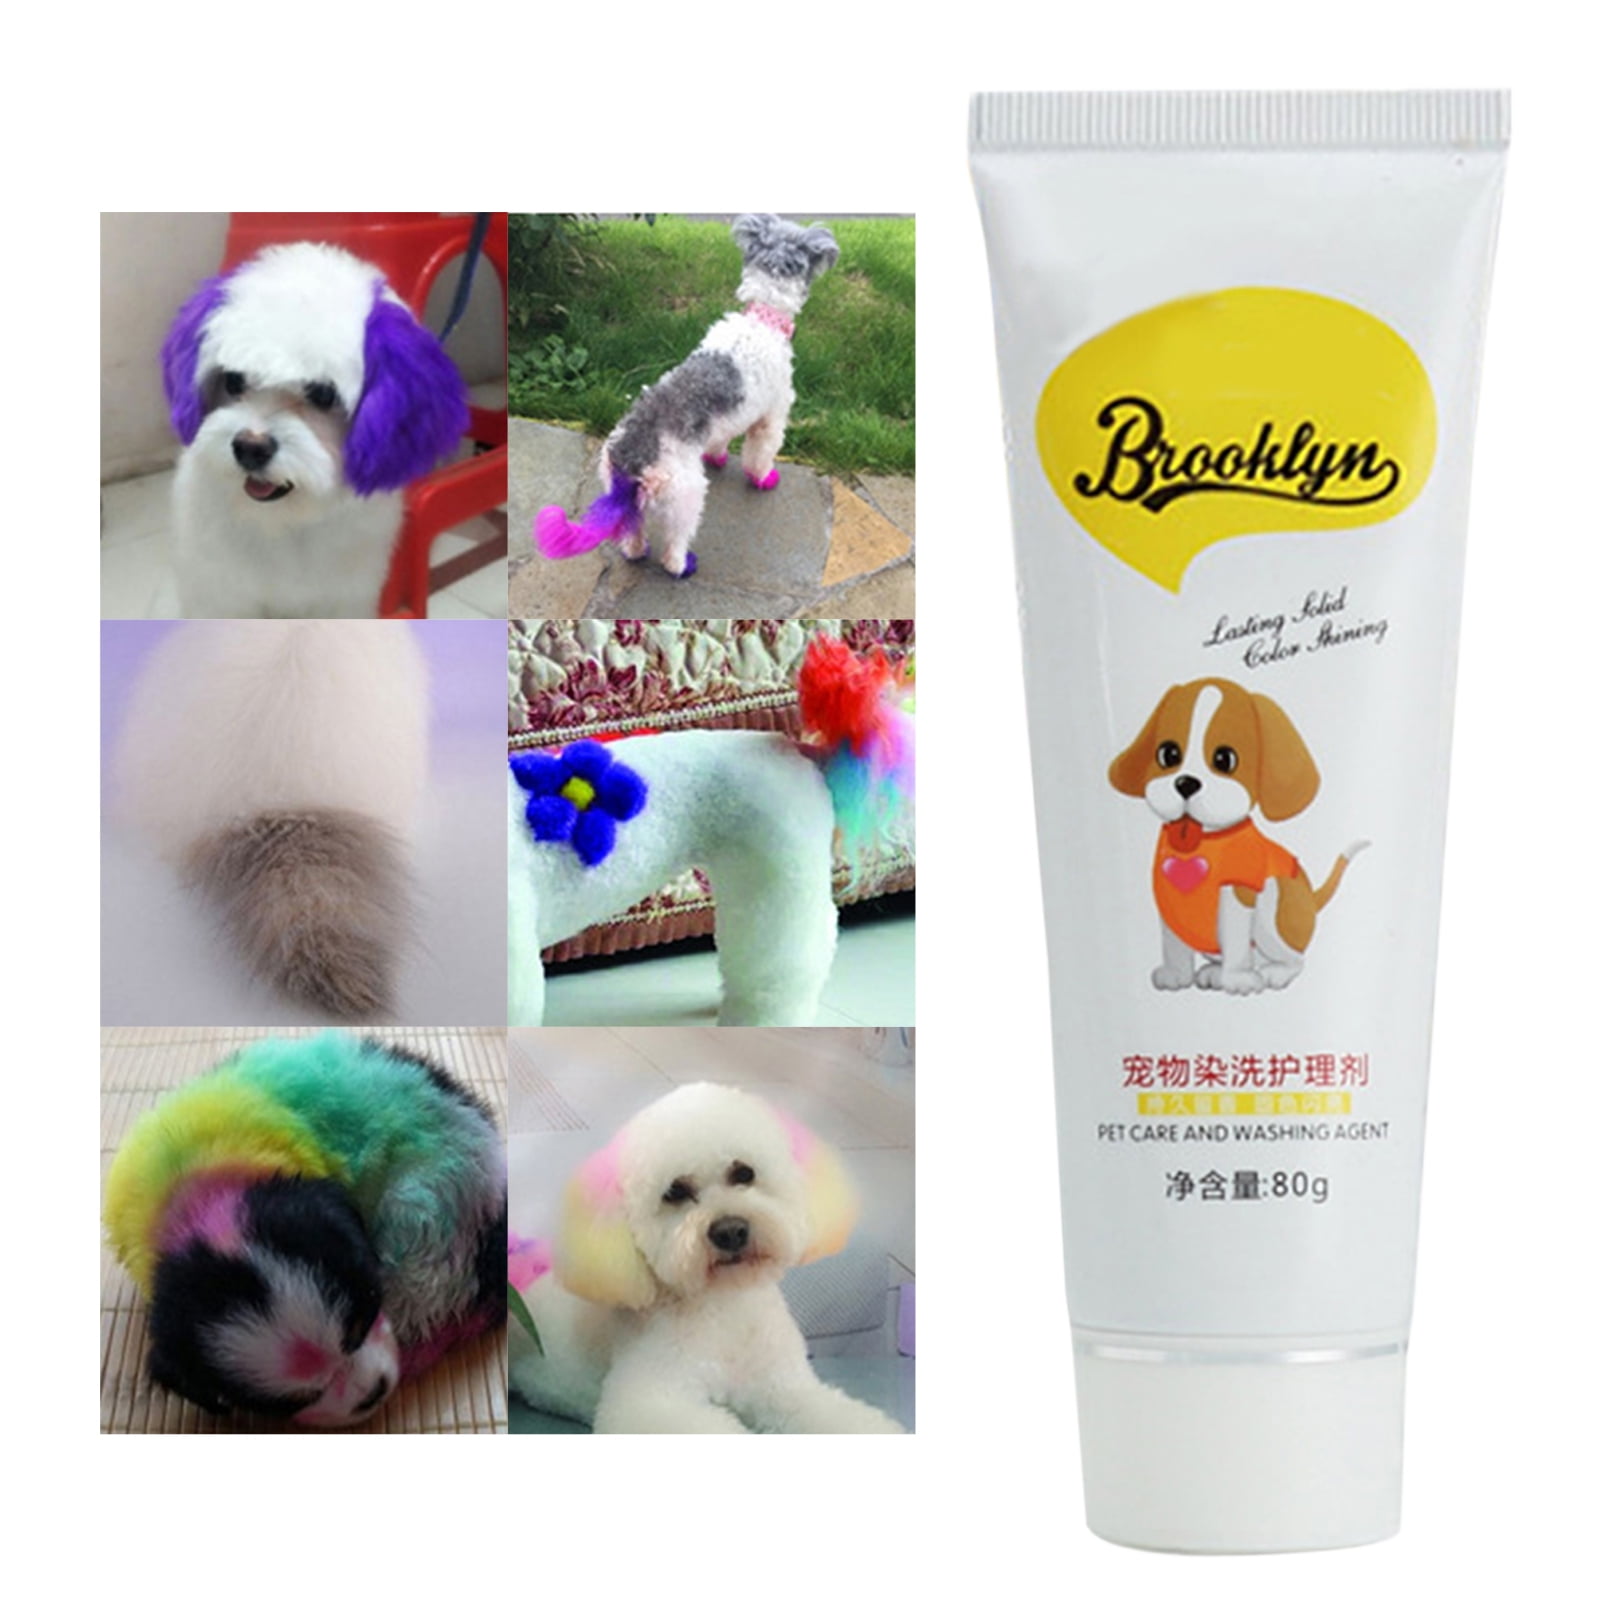 80g Dog Hair Dye Pink Multicolor Harmless Natural Temporary Dye for Pet Grooming